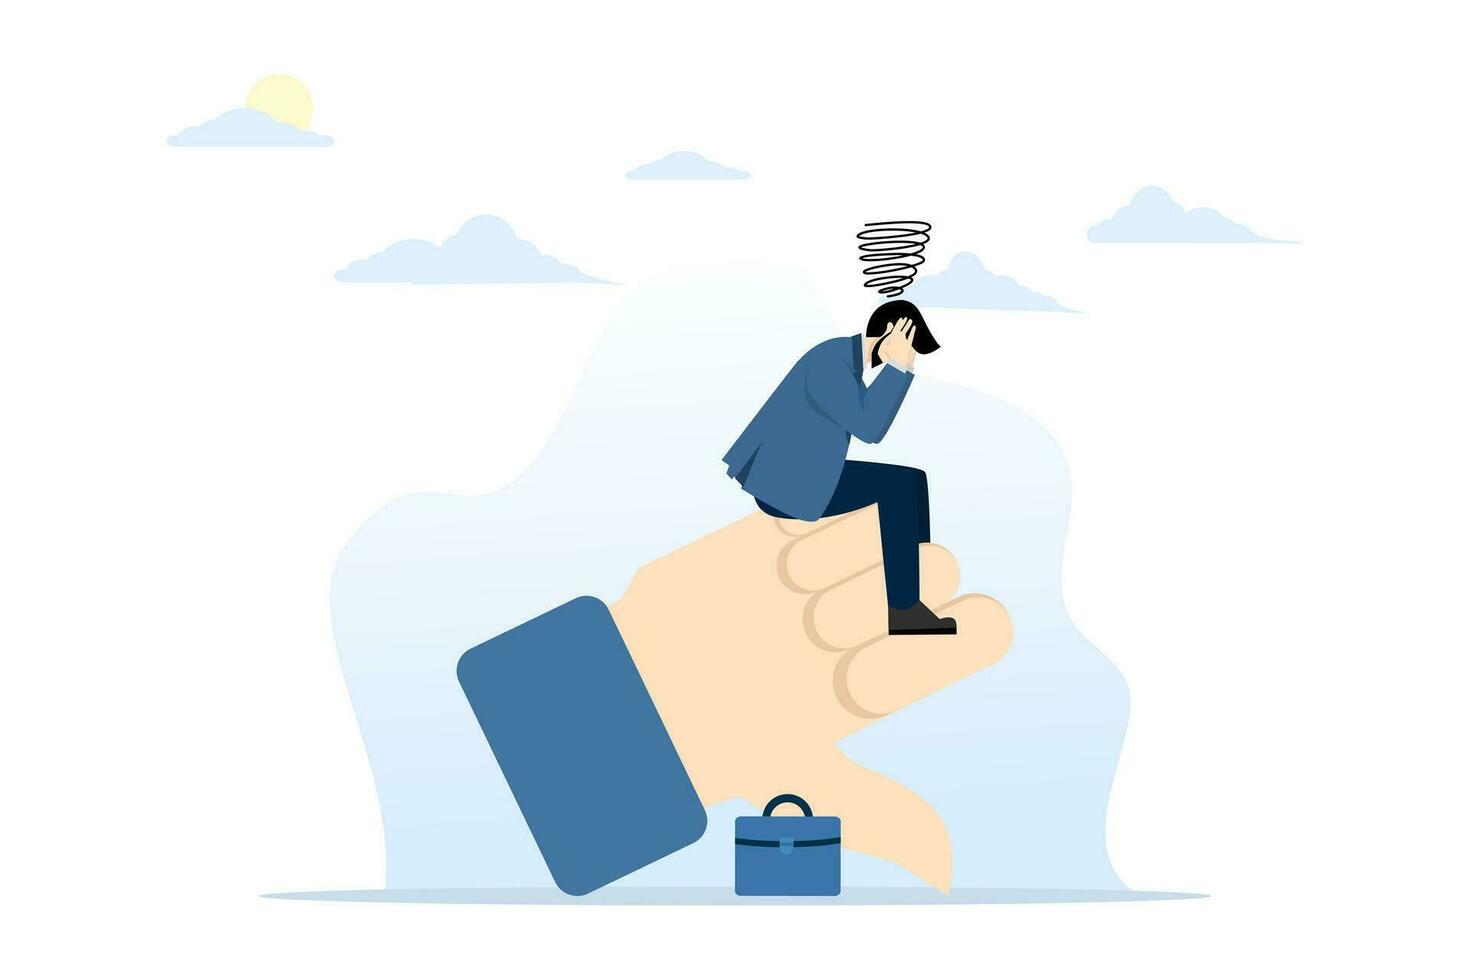 demotivating failure, error or negative feedback concept, no passion or burnout from work, mental breakdown or depression concept, sad stressed businessman sitting on negative thumbs down symbol. vector